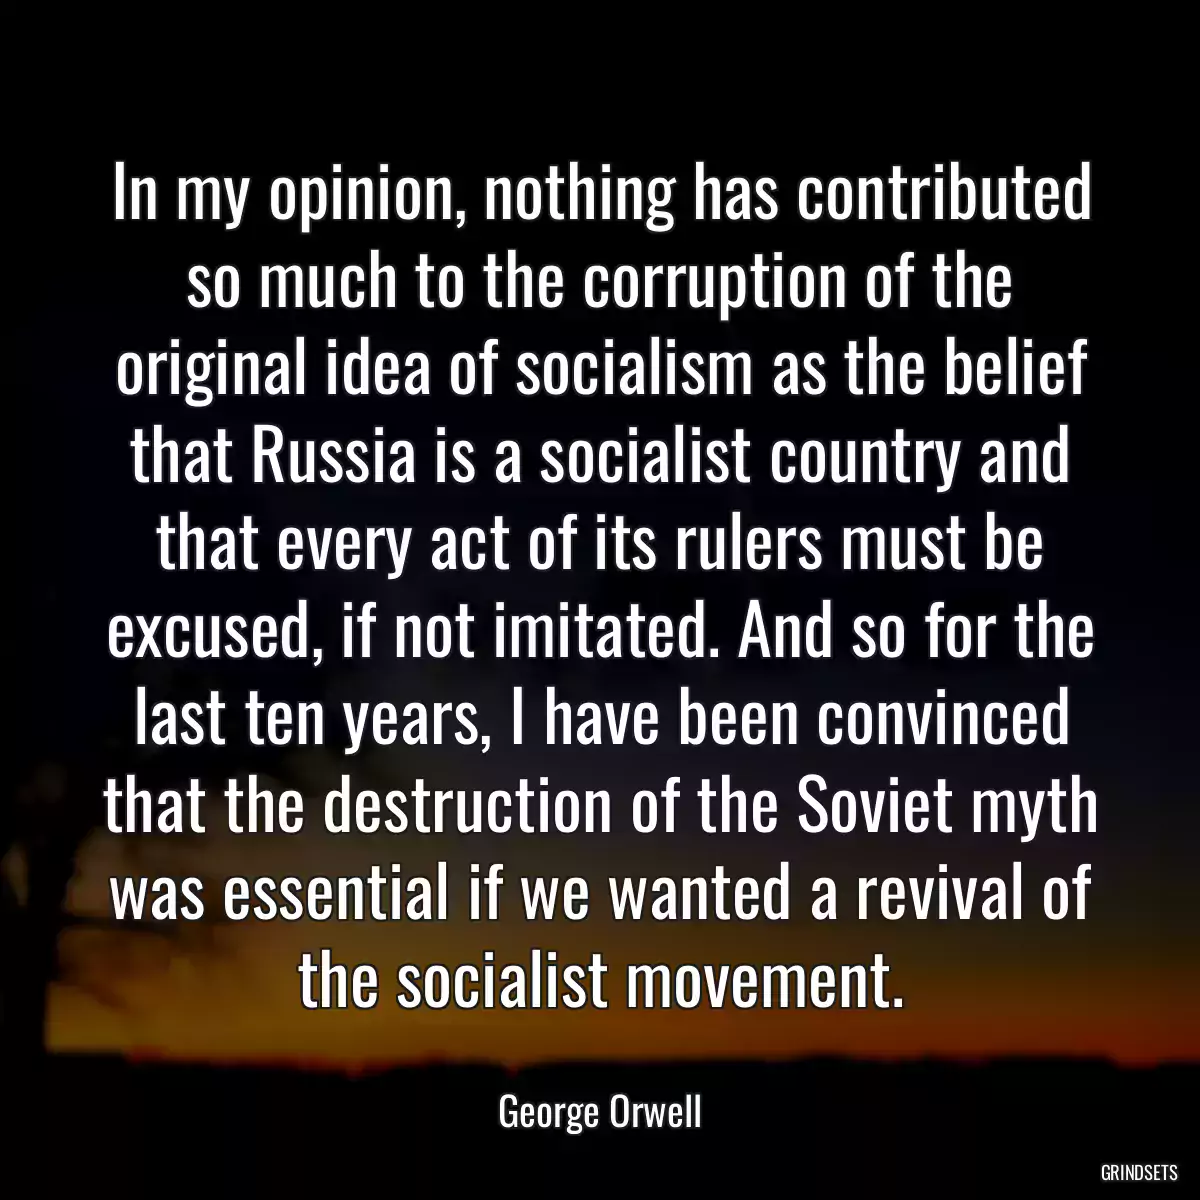 In my opinion, nothing has contributed so much to the corruption of the original idea of socialism as the belief that Russia is a socialist country and that every act of its rulers must be excused, if not imitated. And so for the last ten years, I have been convinced that the destruction of the Soviet myth was essential if we wanted a revival of the socialist movement.